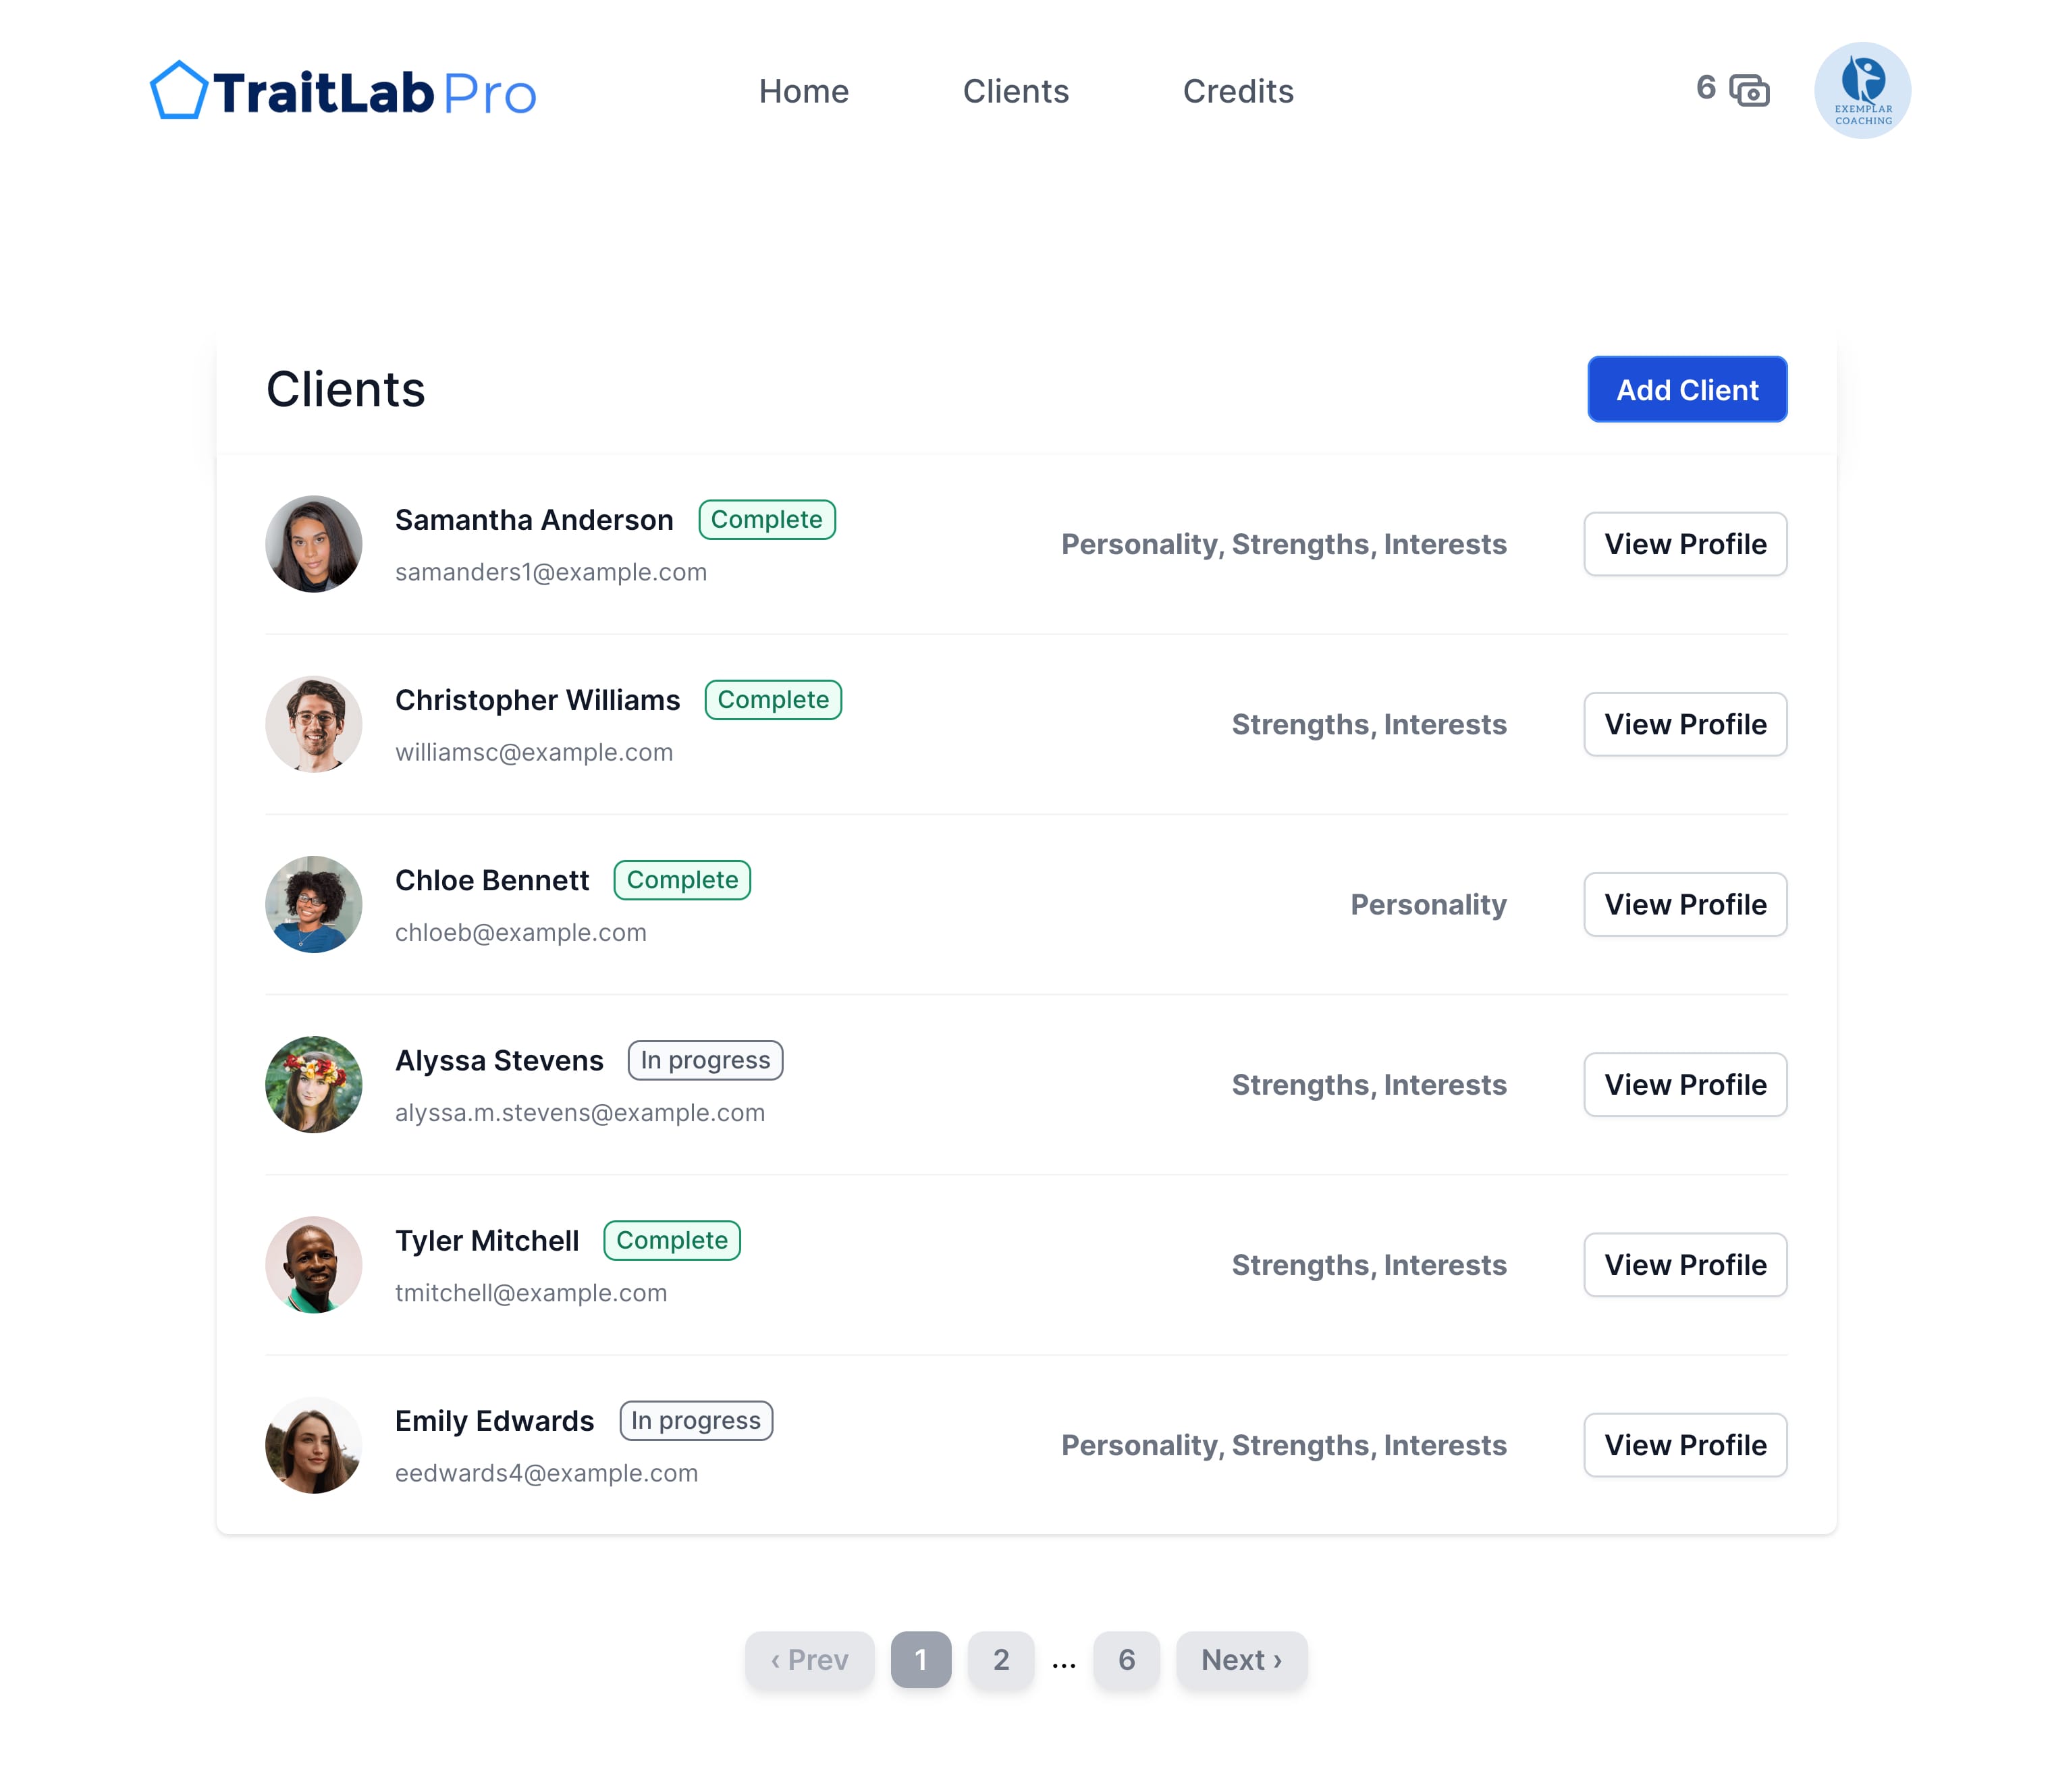 A screenshot of the clients dashboard in TraitLab Pro